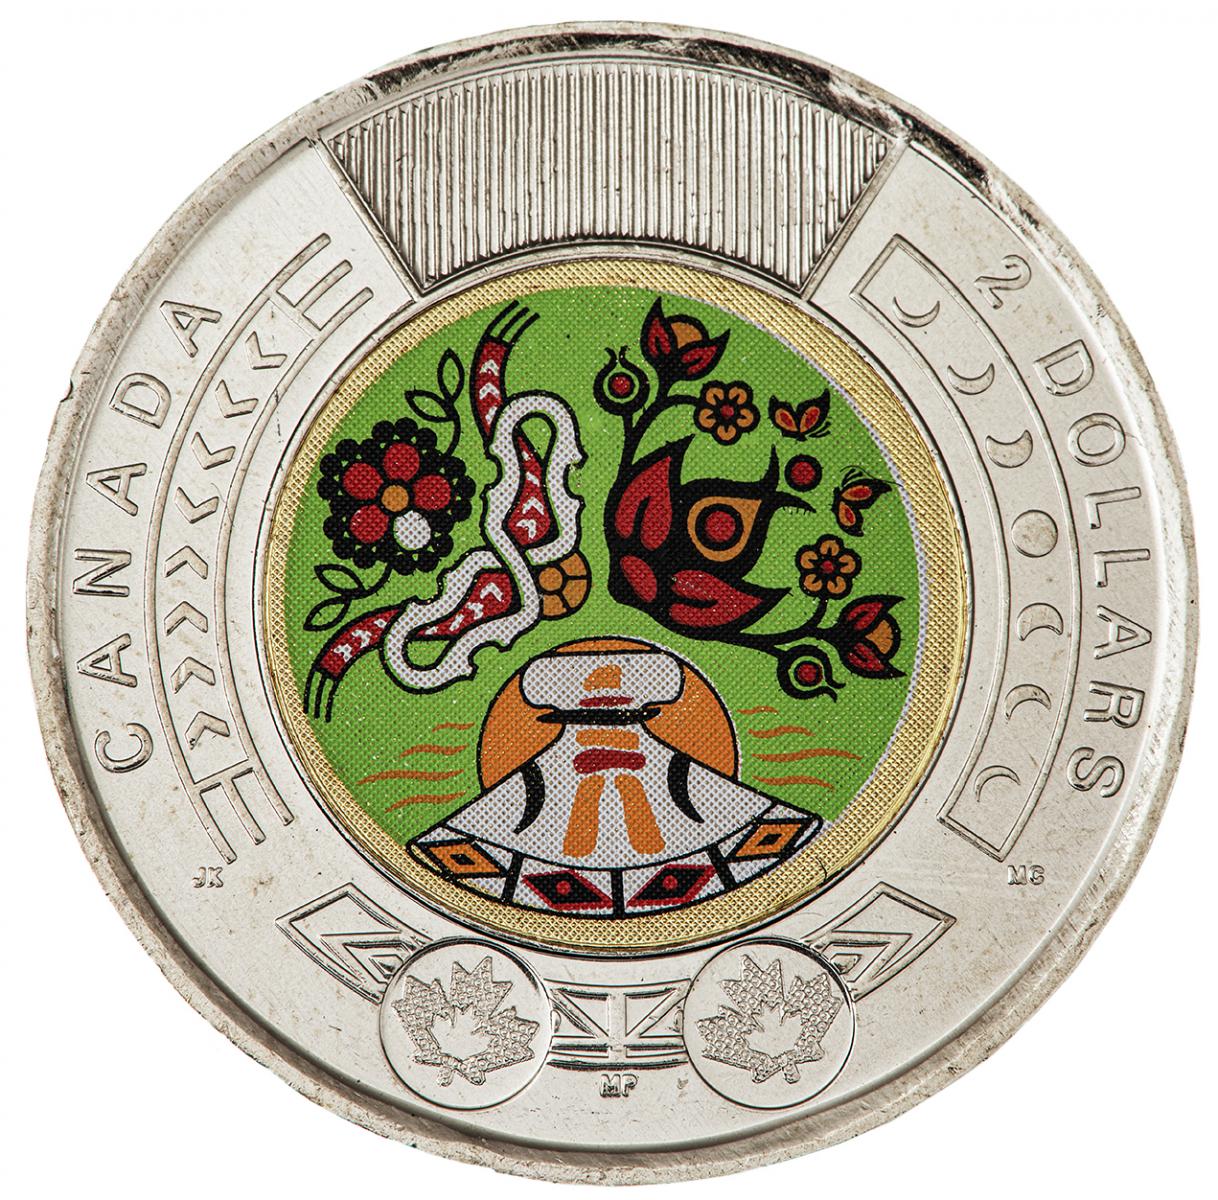 Coin, silver colour with coloured centre image of a flower-patterned painting.